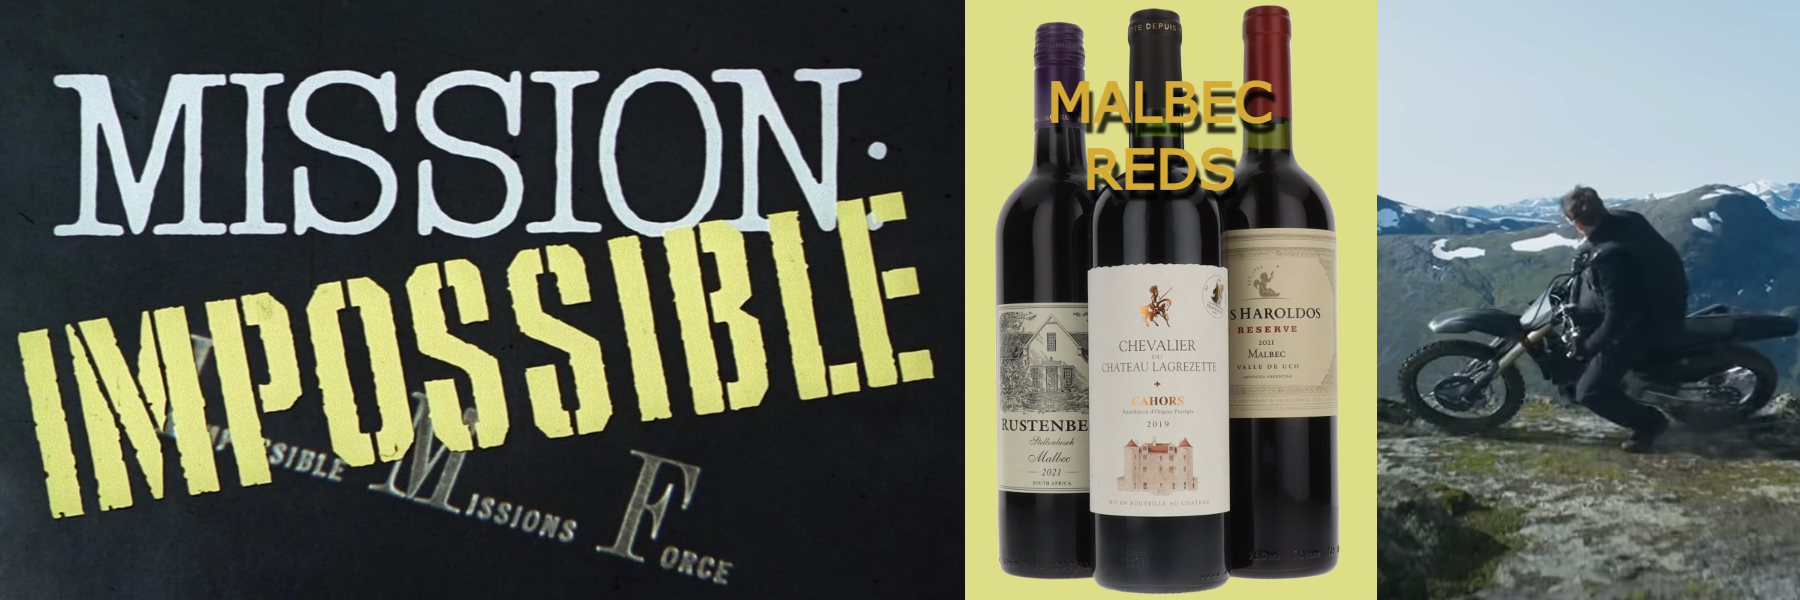 Mission: Impossible ~ Father's Day Malbec Red Selection